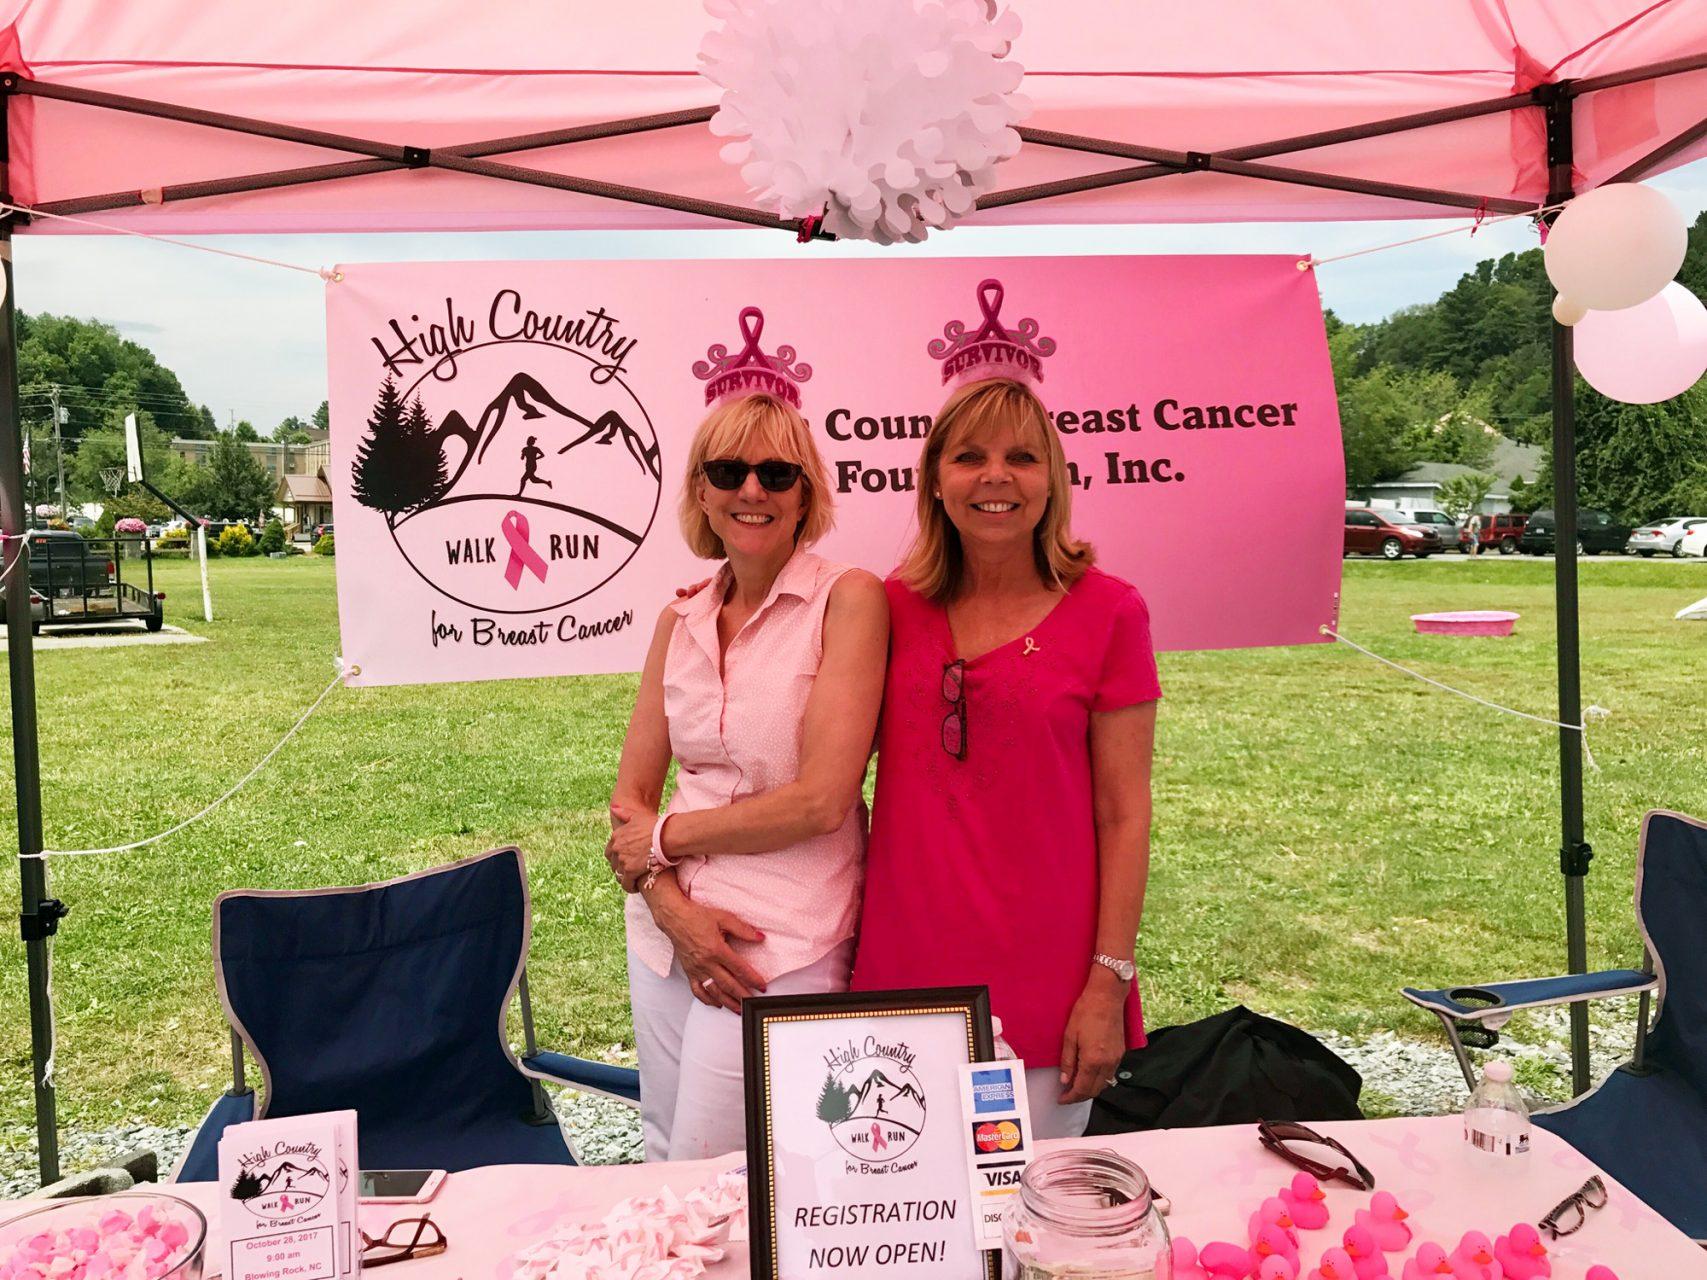 Members of the High Country Breast Cancer Foundation set up a sign-up booth for the Breast Cancer Run/Walk, taking place on Oct. 28.